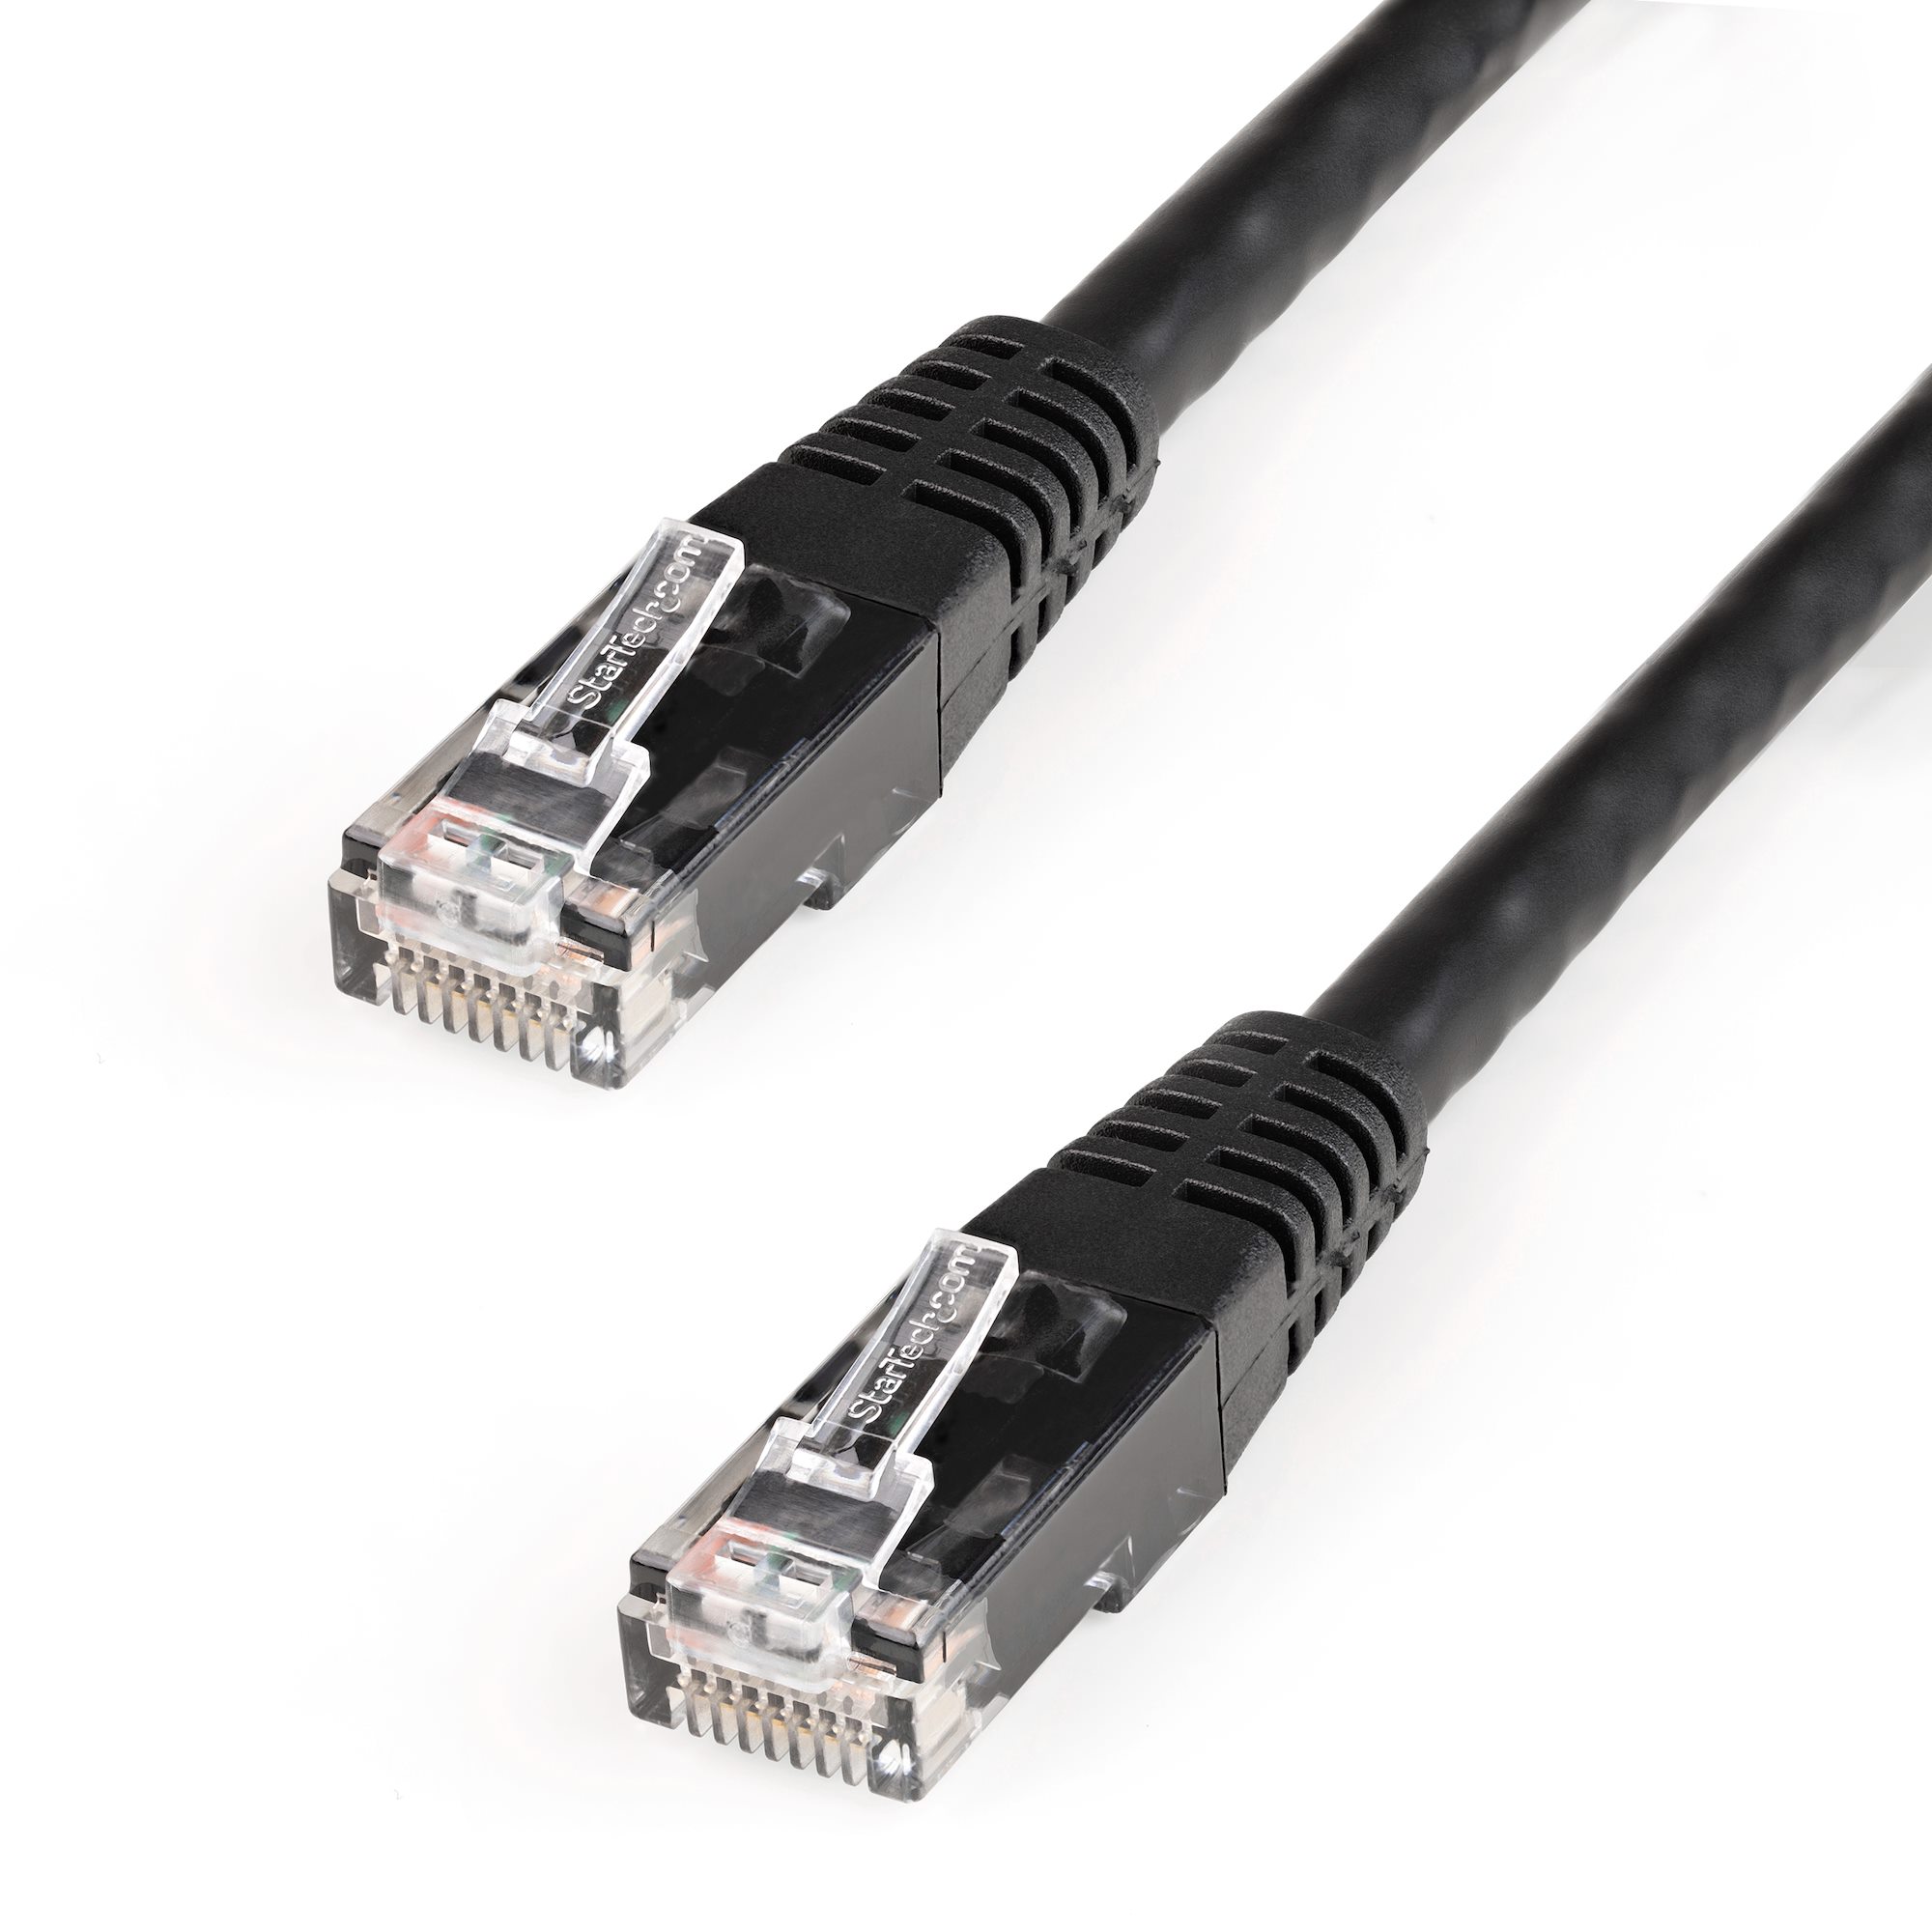 Cat6 Cable, Cat 6 Cable Cable Matters 5-Pack Snagless Short Cat6 Ethernet Cable in Black 0.3m 